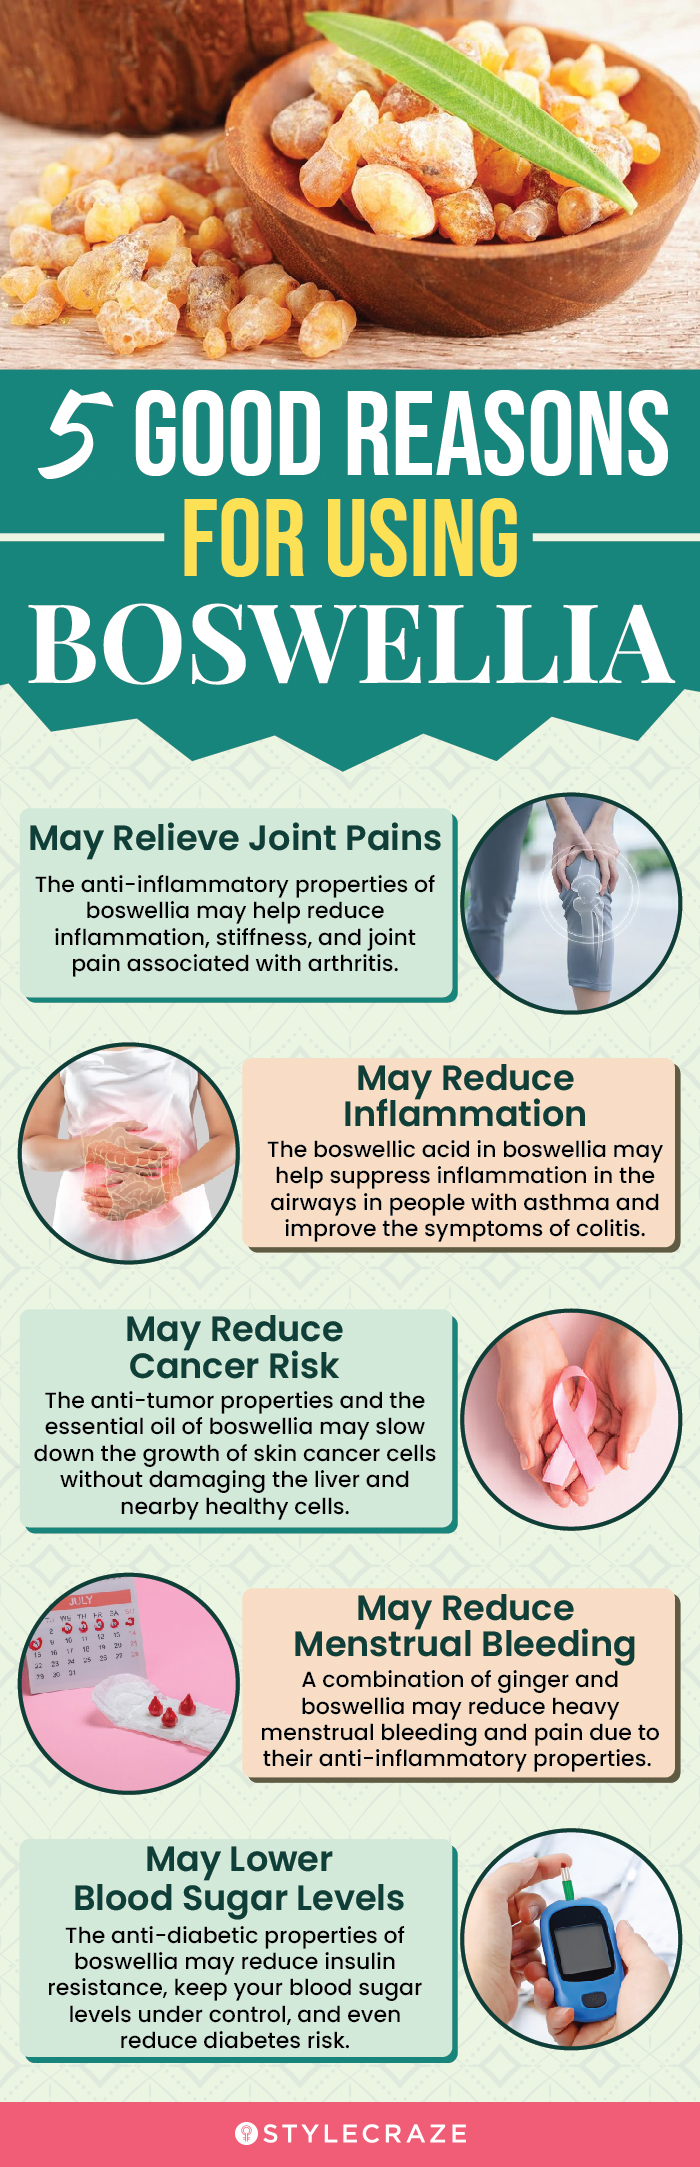 5 good reasons for using boswellia (infographic)